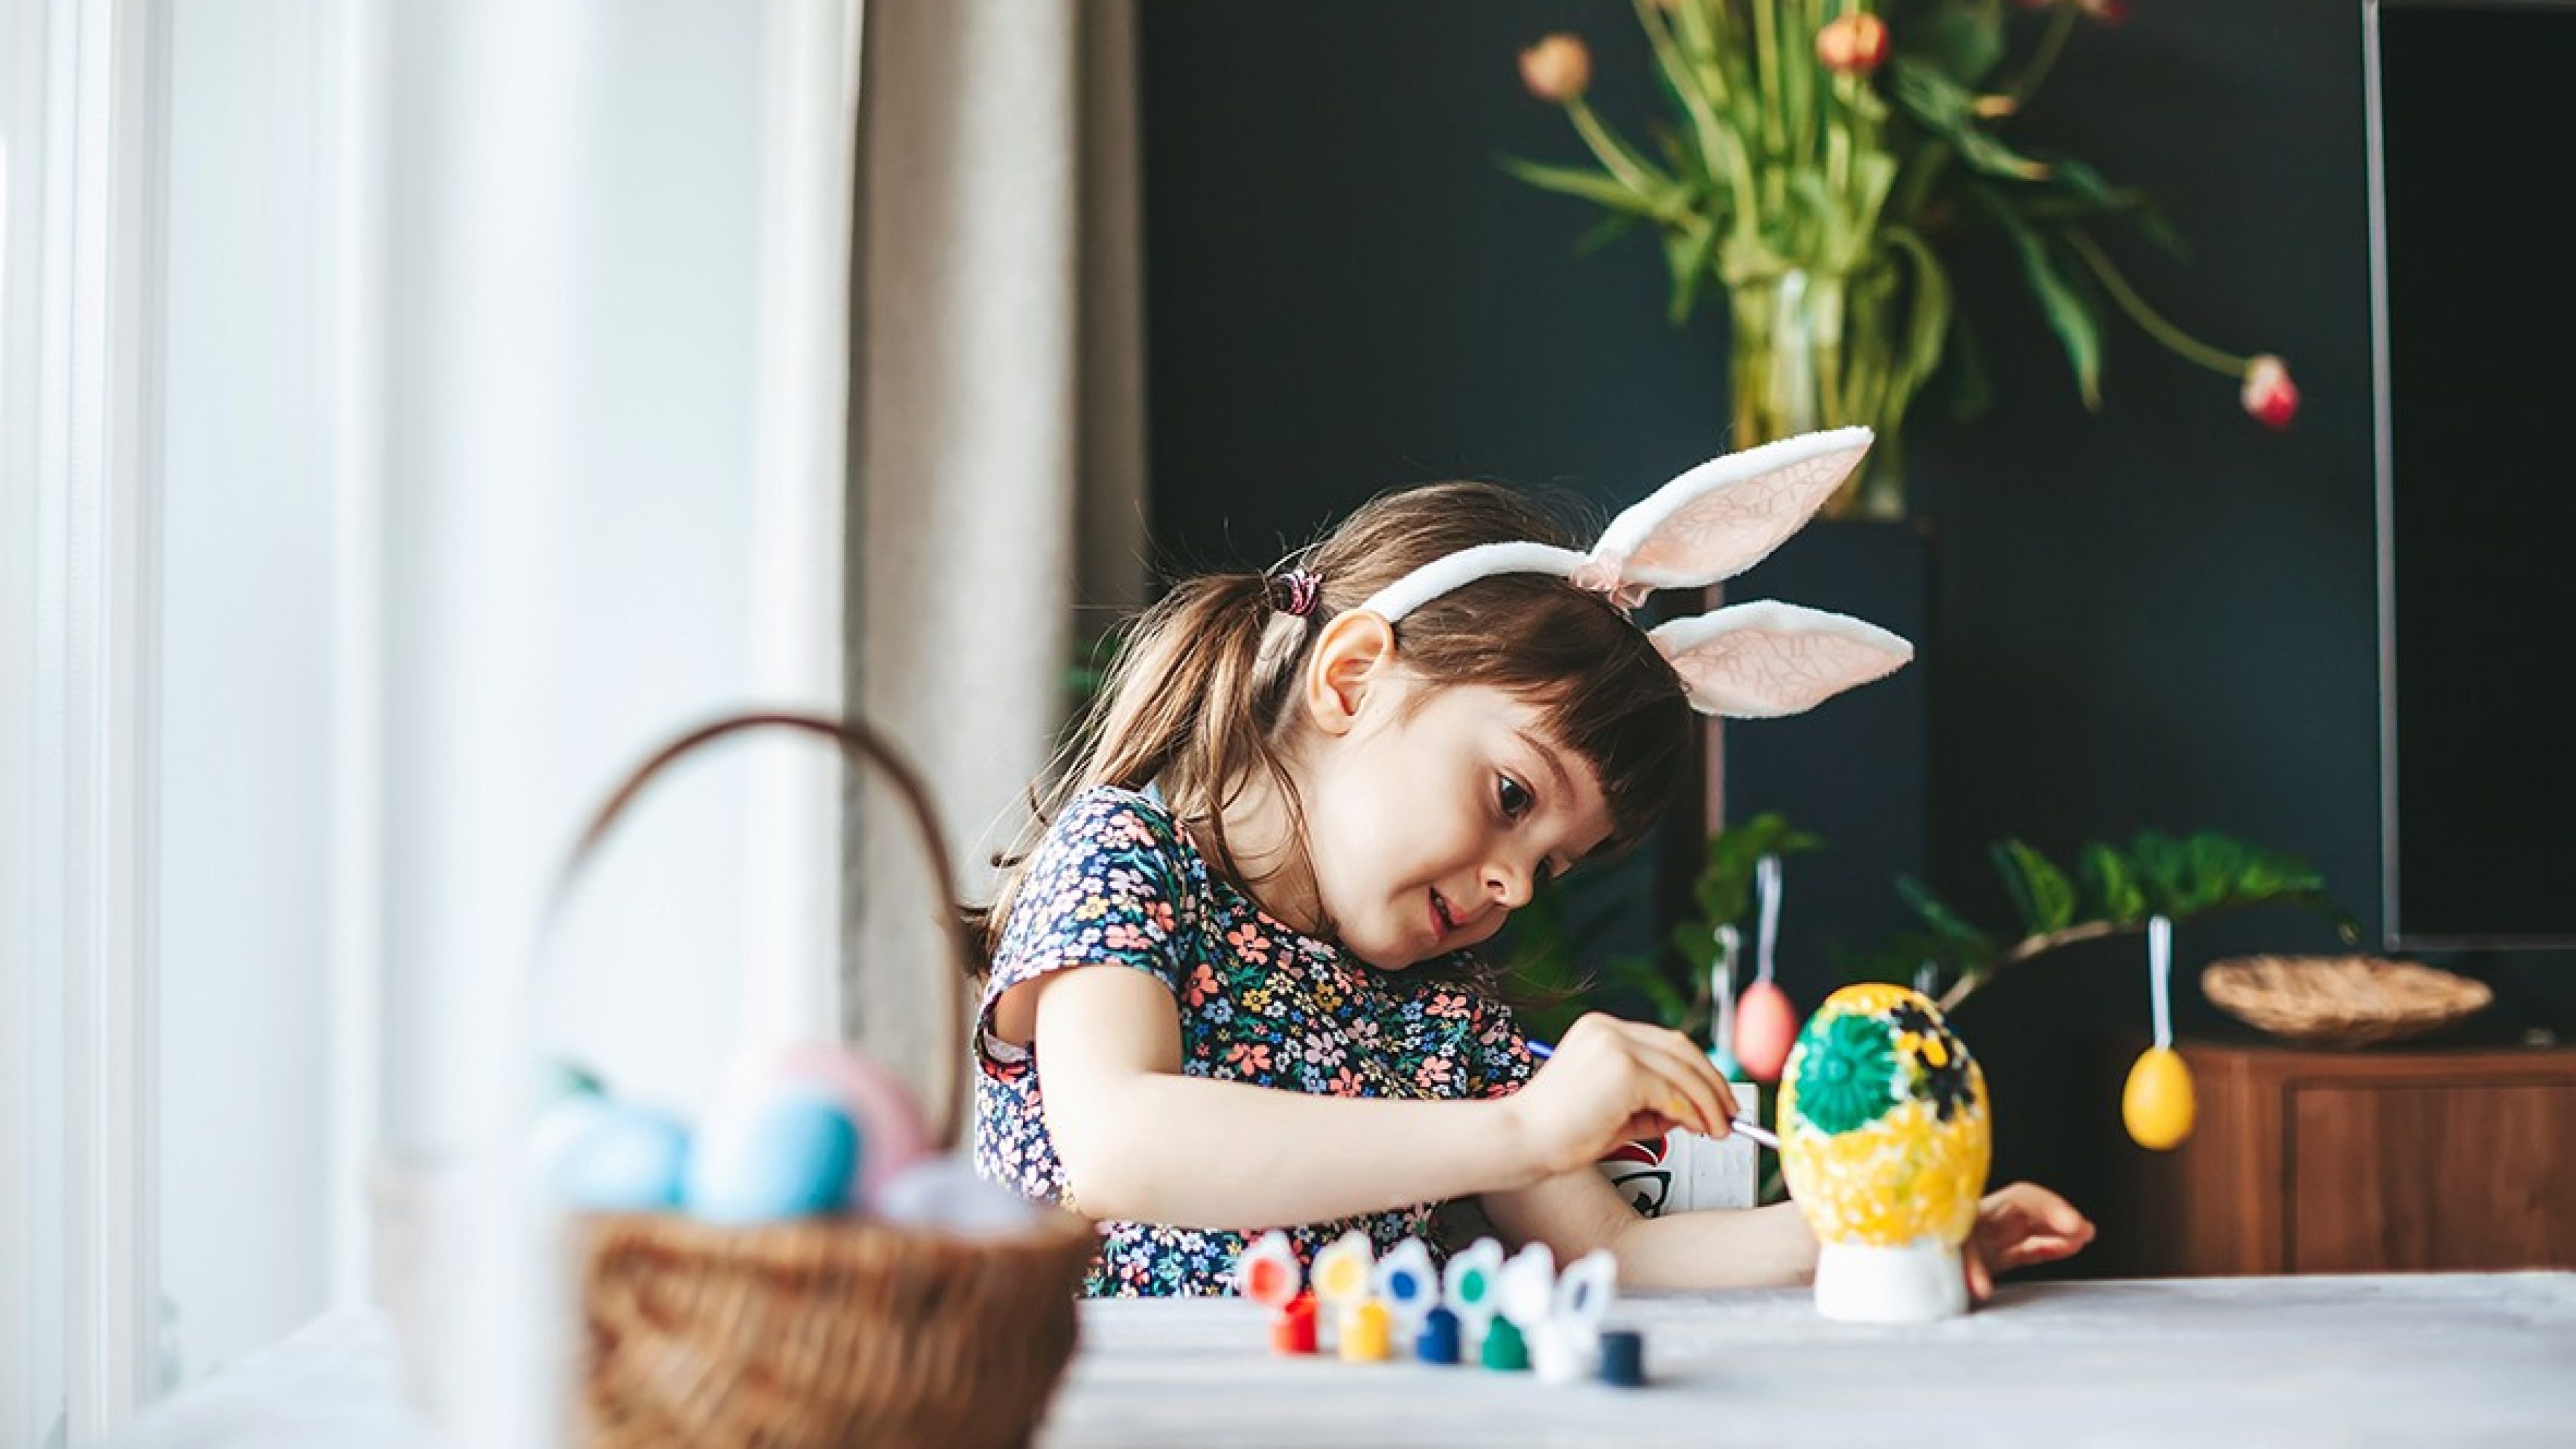 Little girl with bunny ears painting gypsum Easter egg with paintbrush. Easter celebration concept.